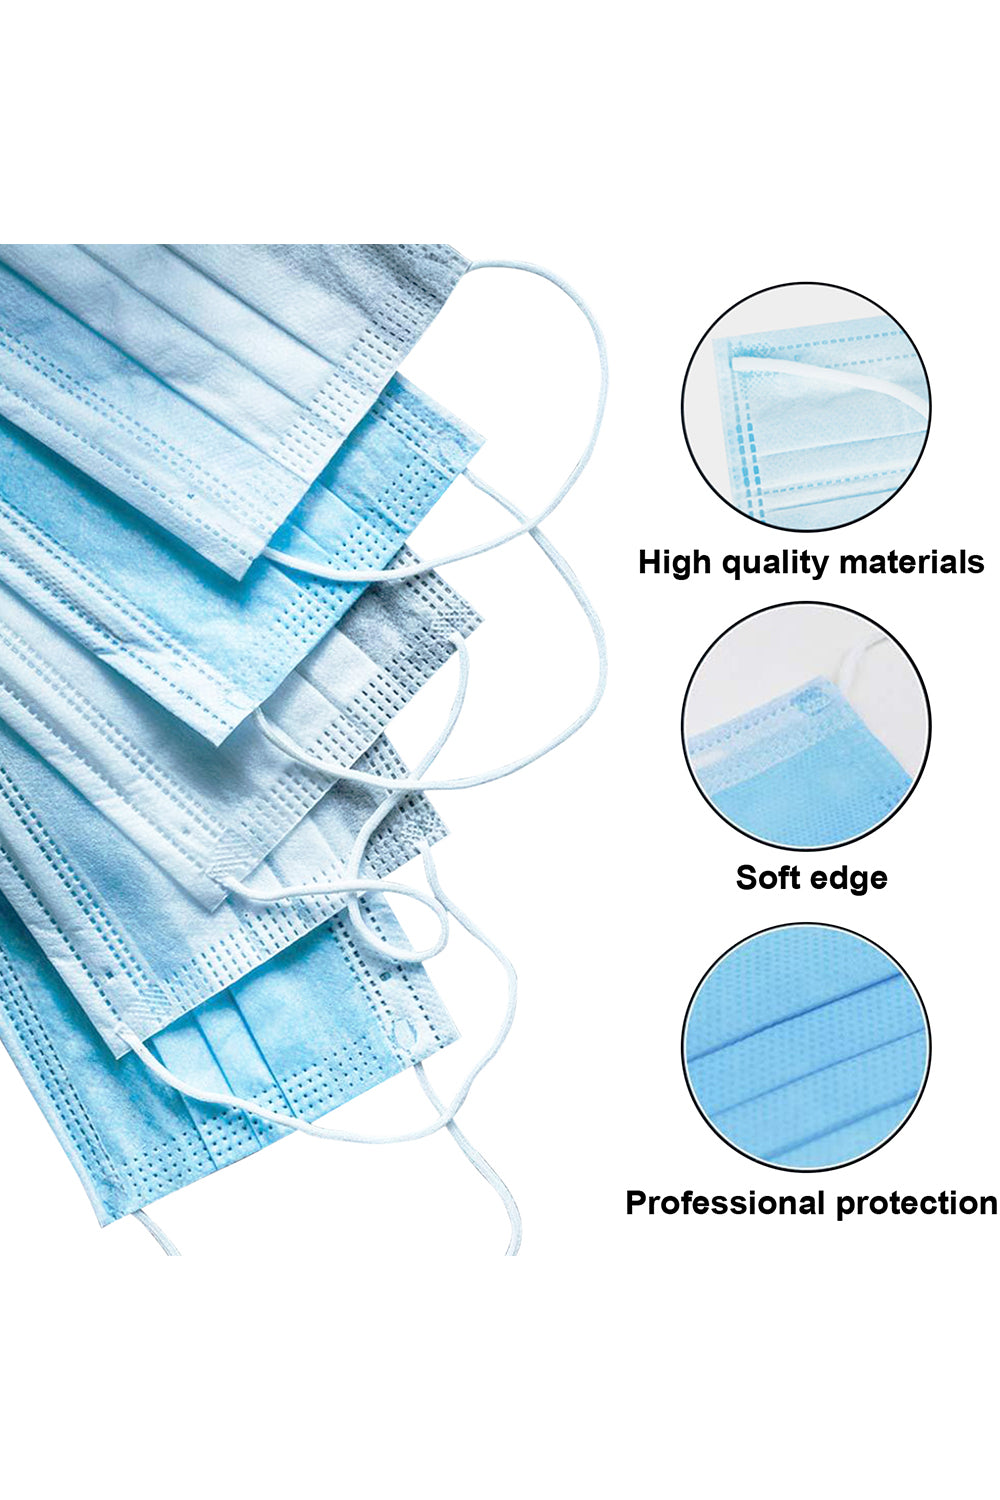 50 Pcs Disposable Face Masks with Elastic Ear Loop 3 Ply for Blocking Dust Air Pollution Protection